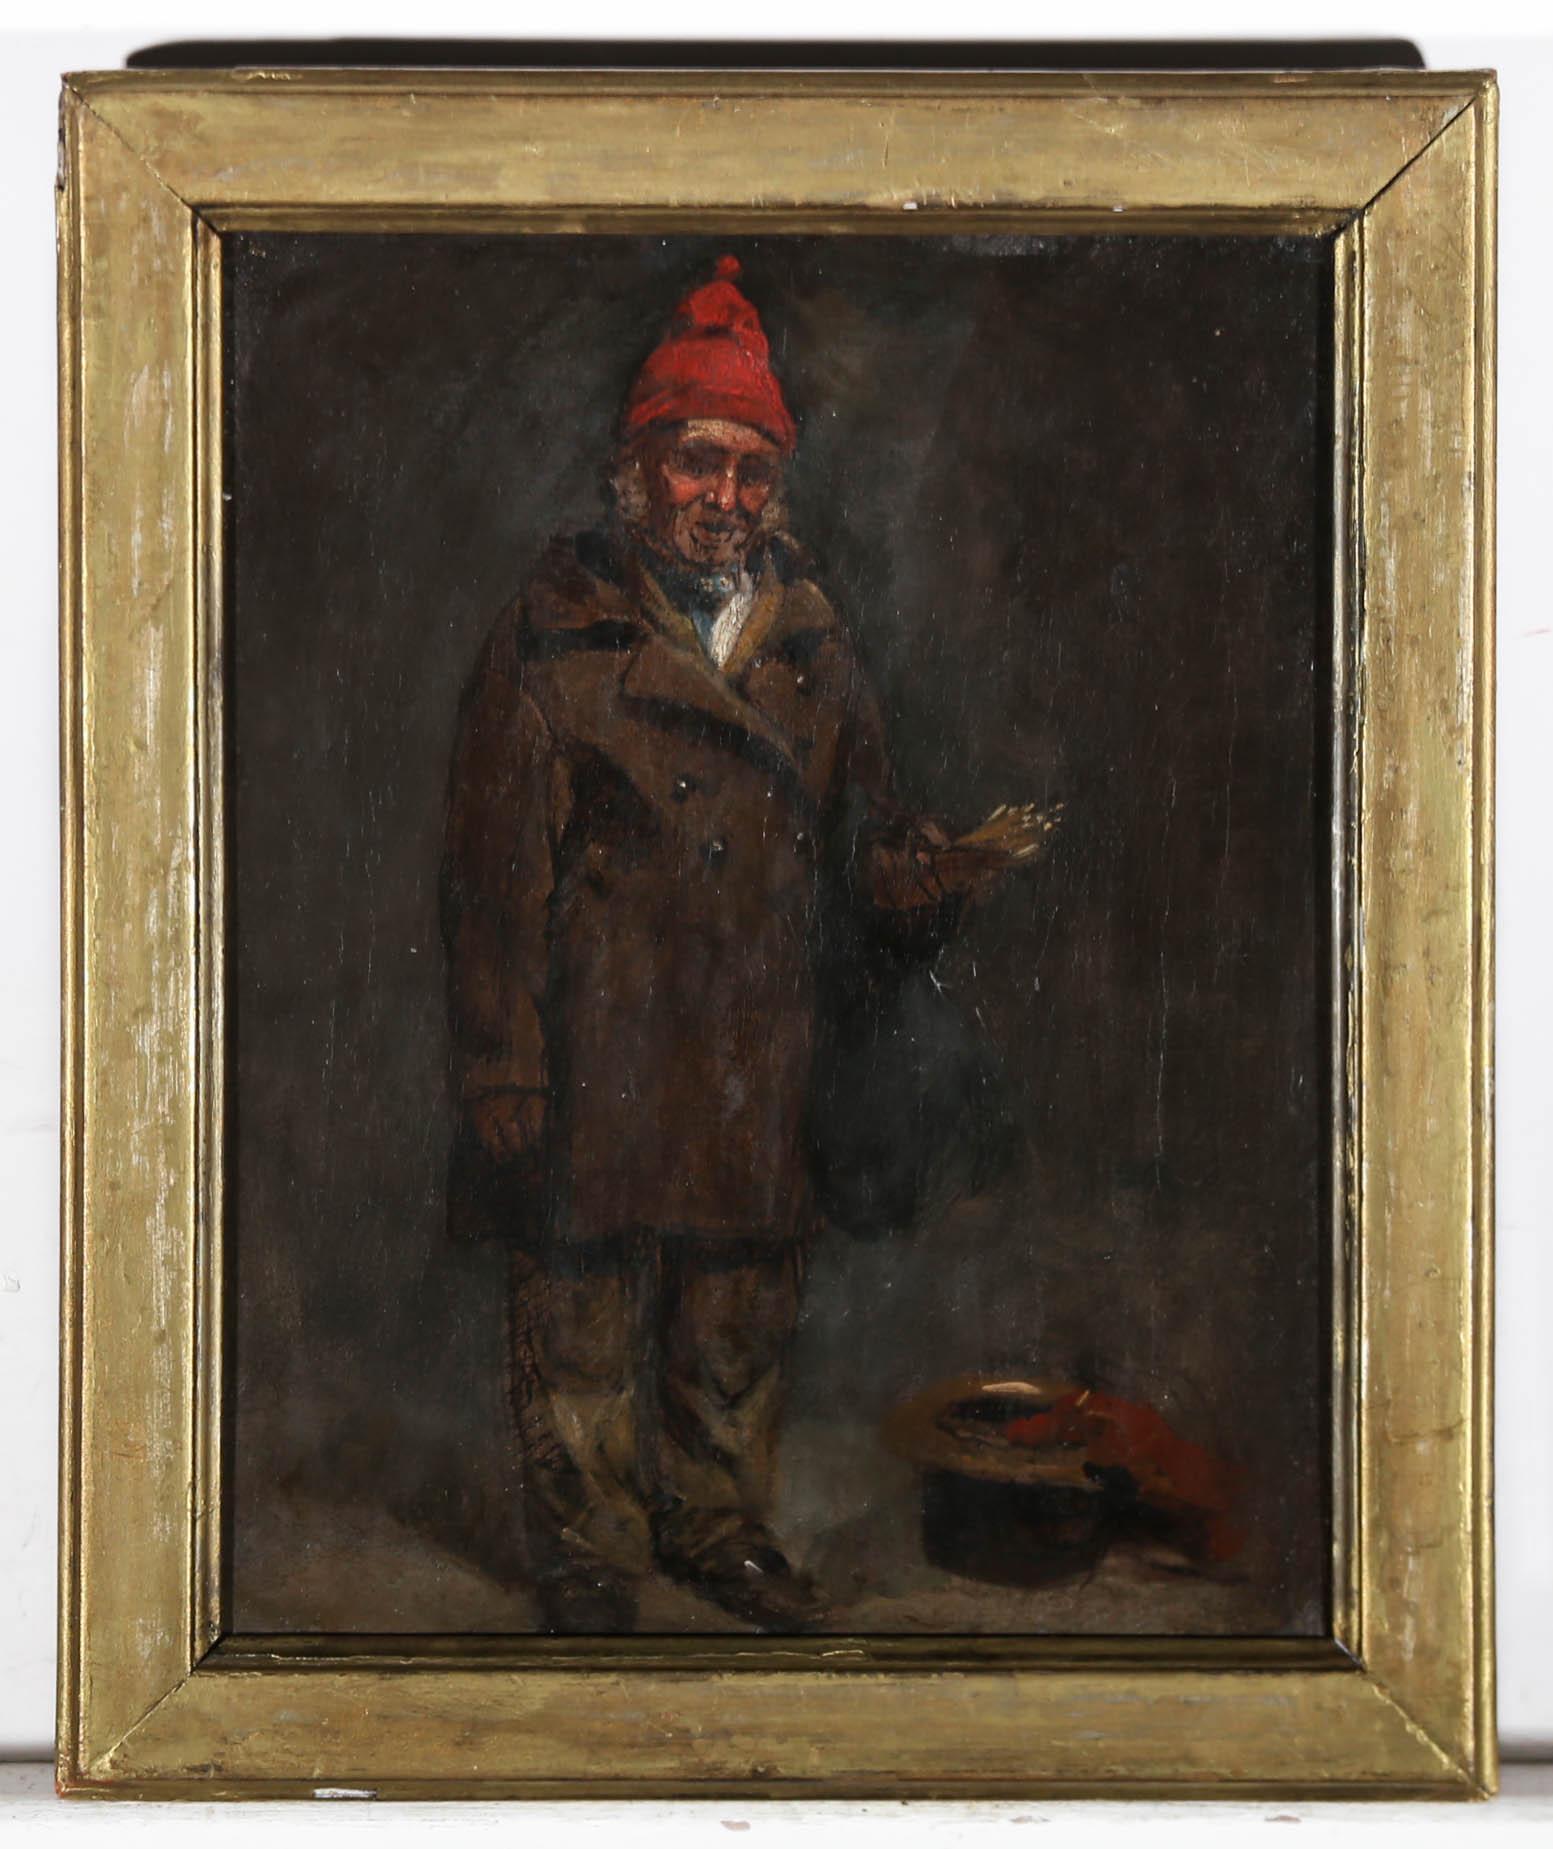 A charming 19th Century, full length portrait, showing an old match seller in a brown coat and red woollen hat. He is holding a bunch of matches in his hand. The painting is unsigned and presented in a 19th Century gilt slip. The canvas has been